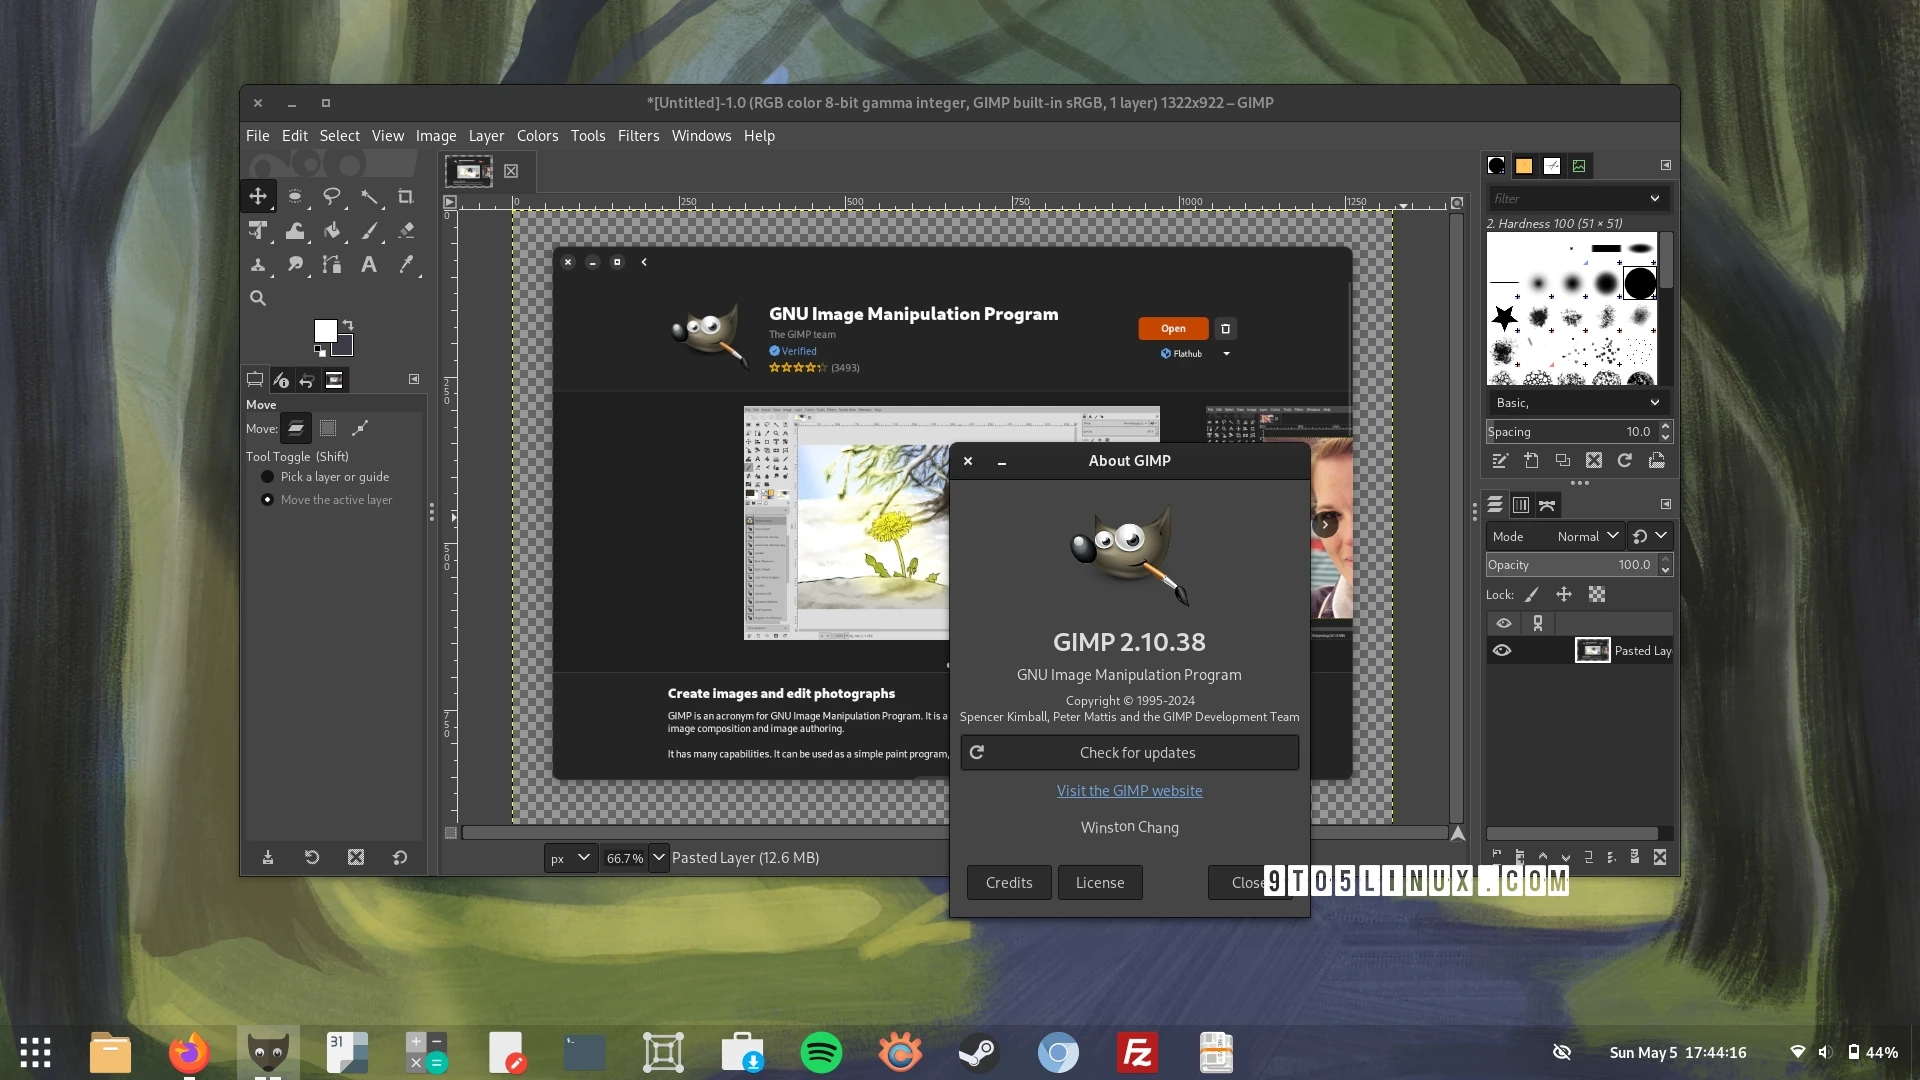 Release Update: GIMP 2.10.38 Includes Backports of the Most-Requested GTK3 Features